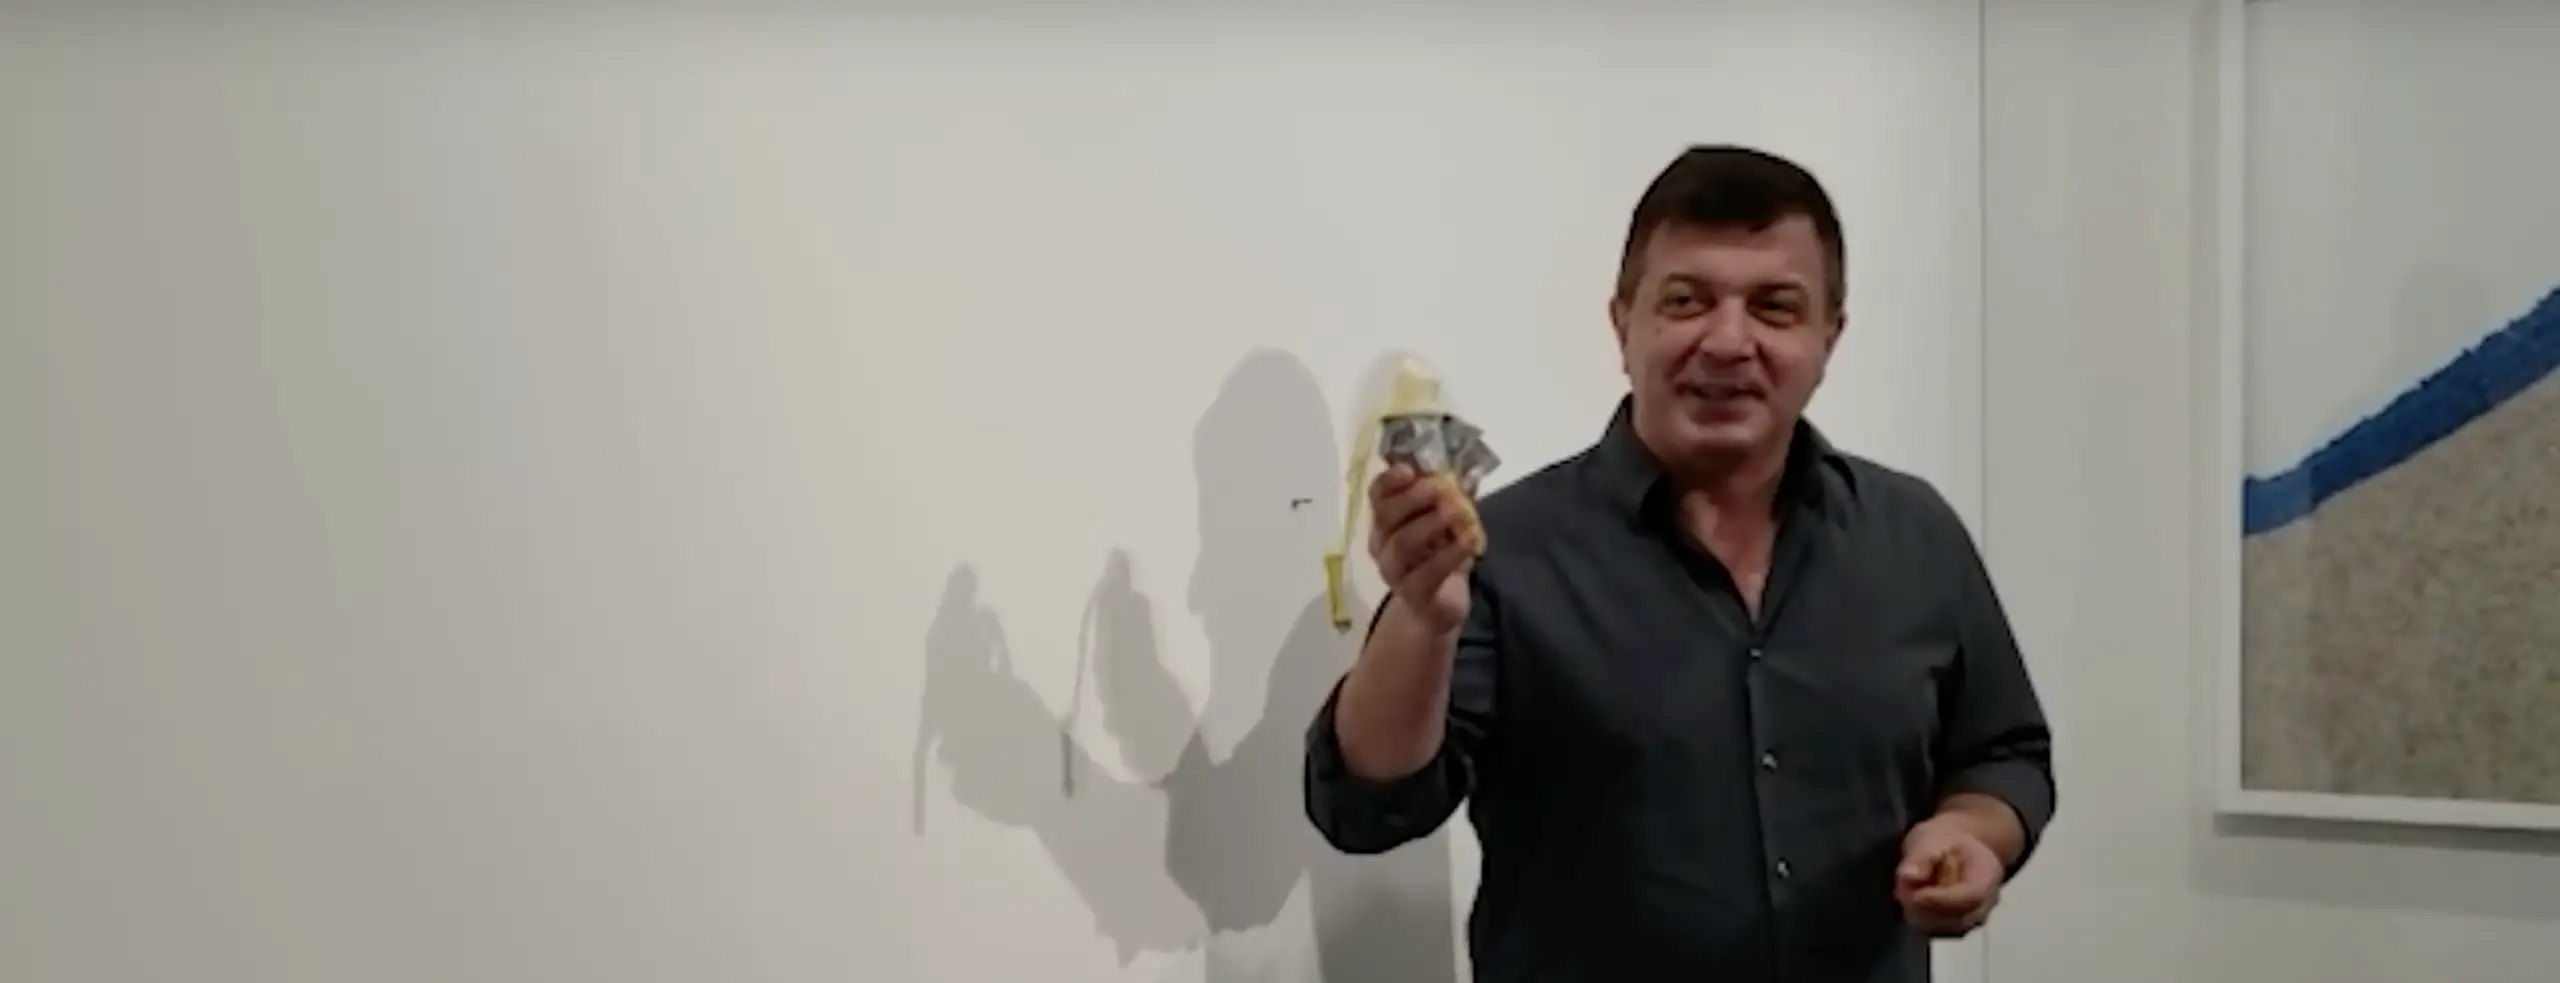 039Art - Art Basel Had A $150K Banana &#039;Art Installation&#039; Duct-Taped To A Wall. A Guy Just Ate It